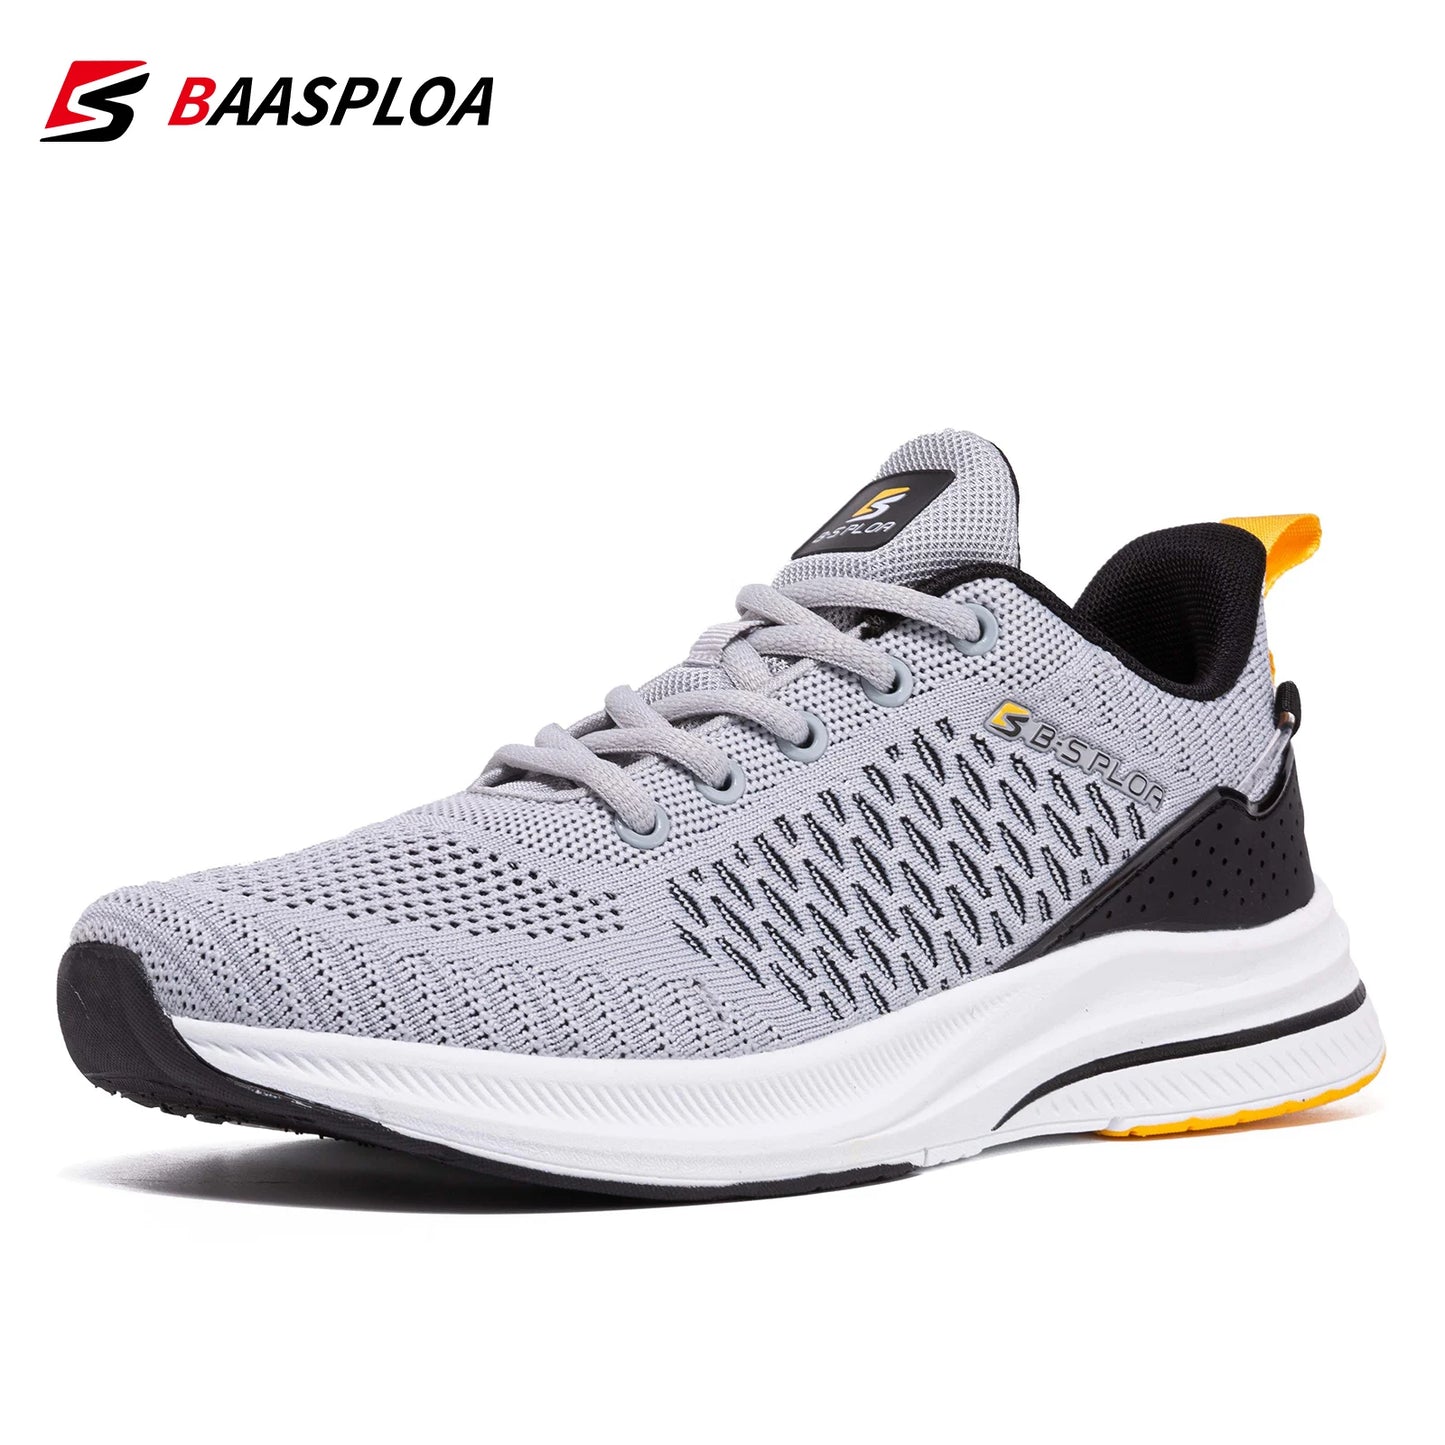 Men Knit Casual Walking Shoes  Breathable Sneakers Light Shock Absorption